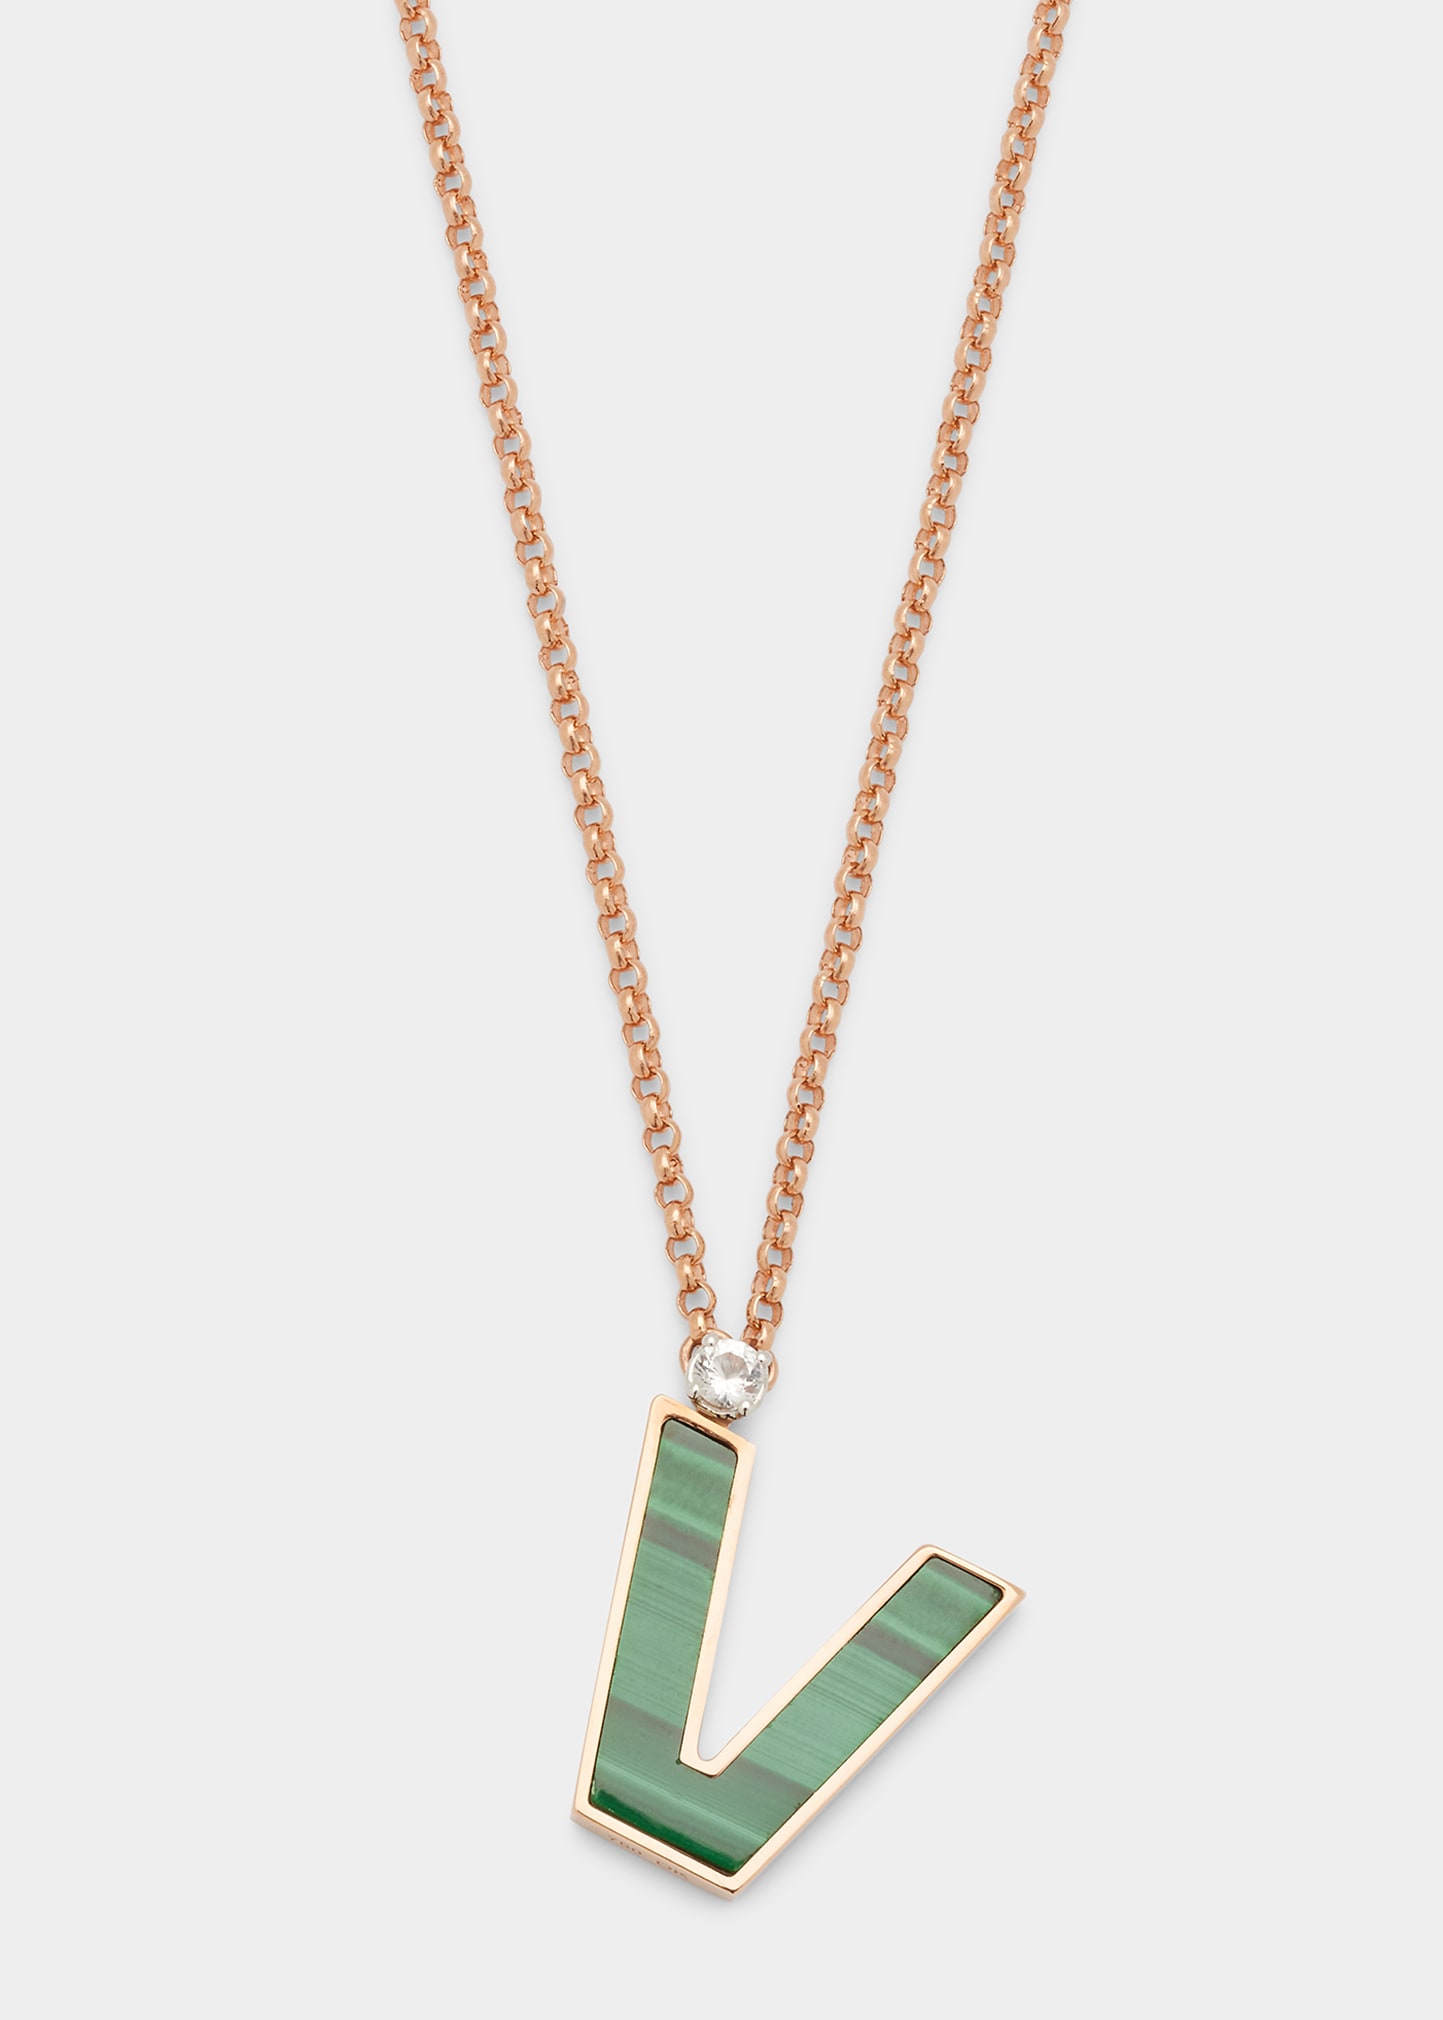 Rose Gold 'V' Letter Charm Necklace with Malachite and White Sapphire